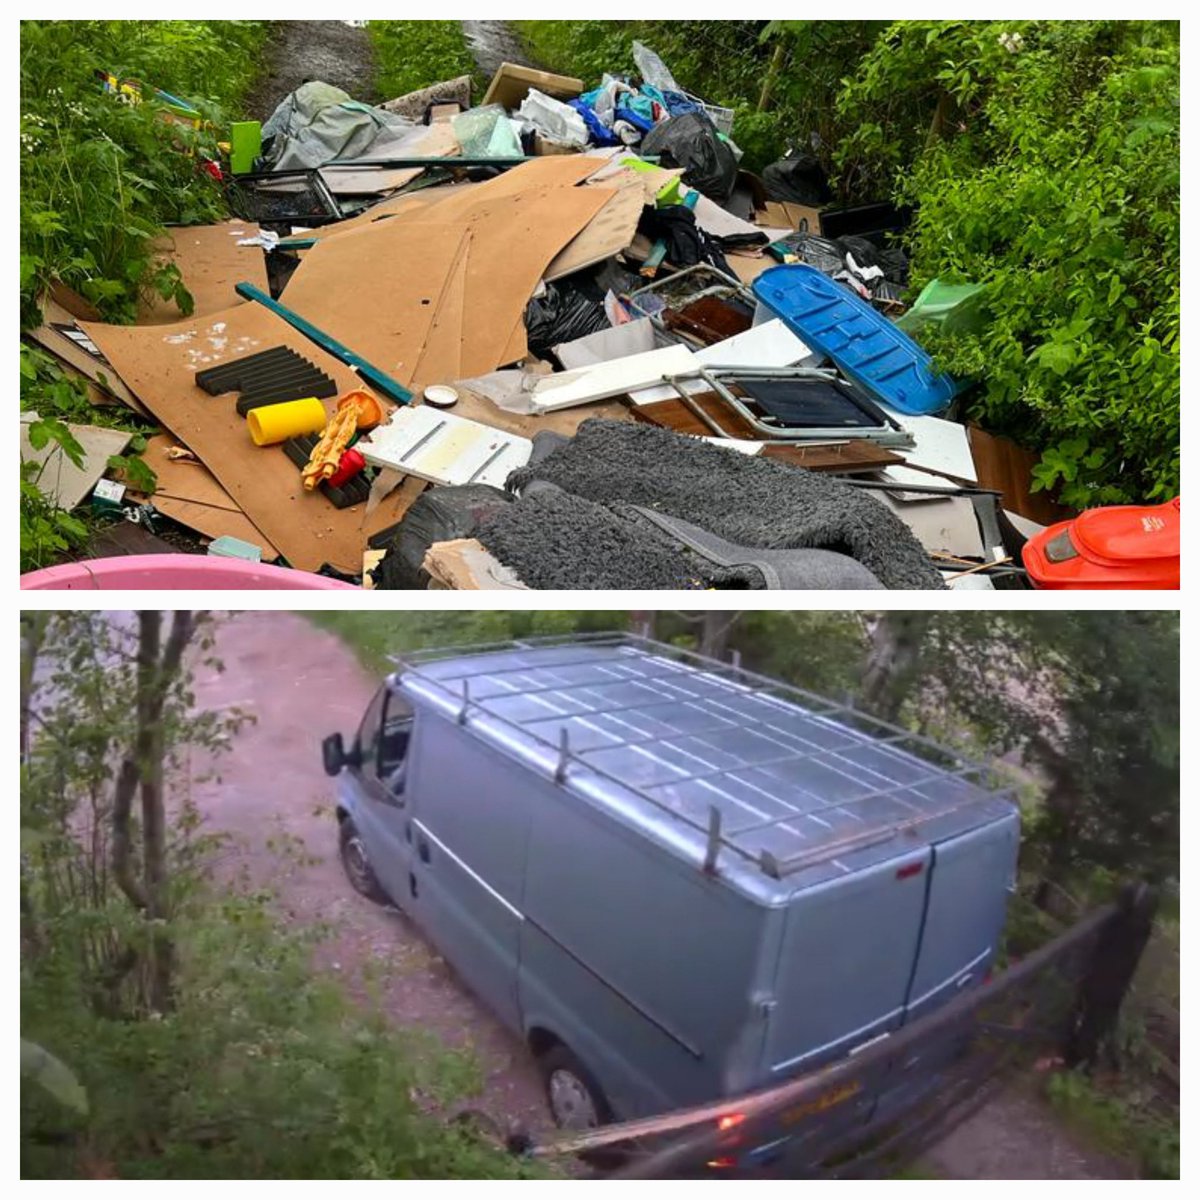 Fly tipper, 30/12/2022 Proud of this result. Male pleaded guilty to Crim damage (£4520.0), Causing the deposit from a Motor vehicle of Controlled waste on land without a permit, and not being a registered carrier of Controlled waste  #Rural #RuralCrime #WasteCrime 
#OpFlycatcher